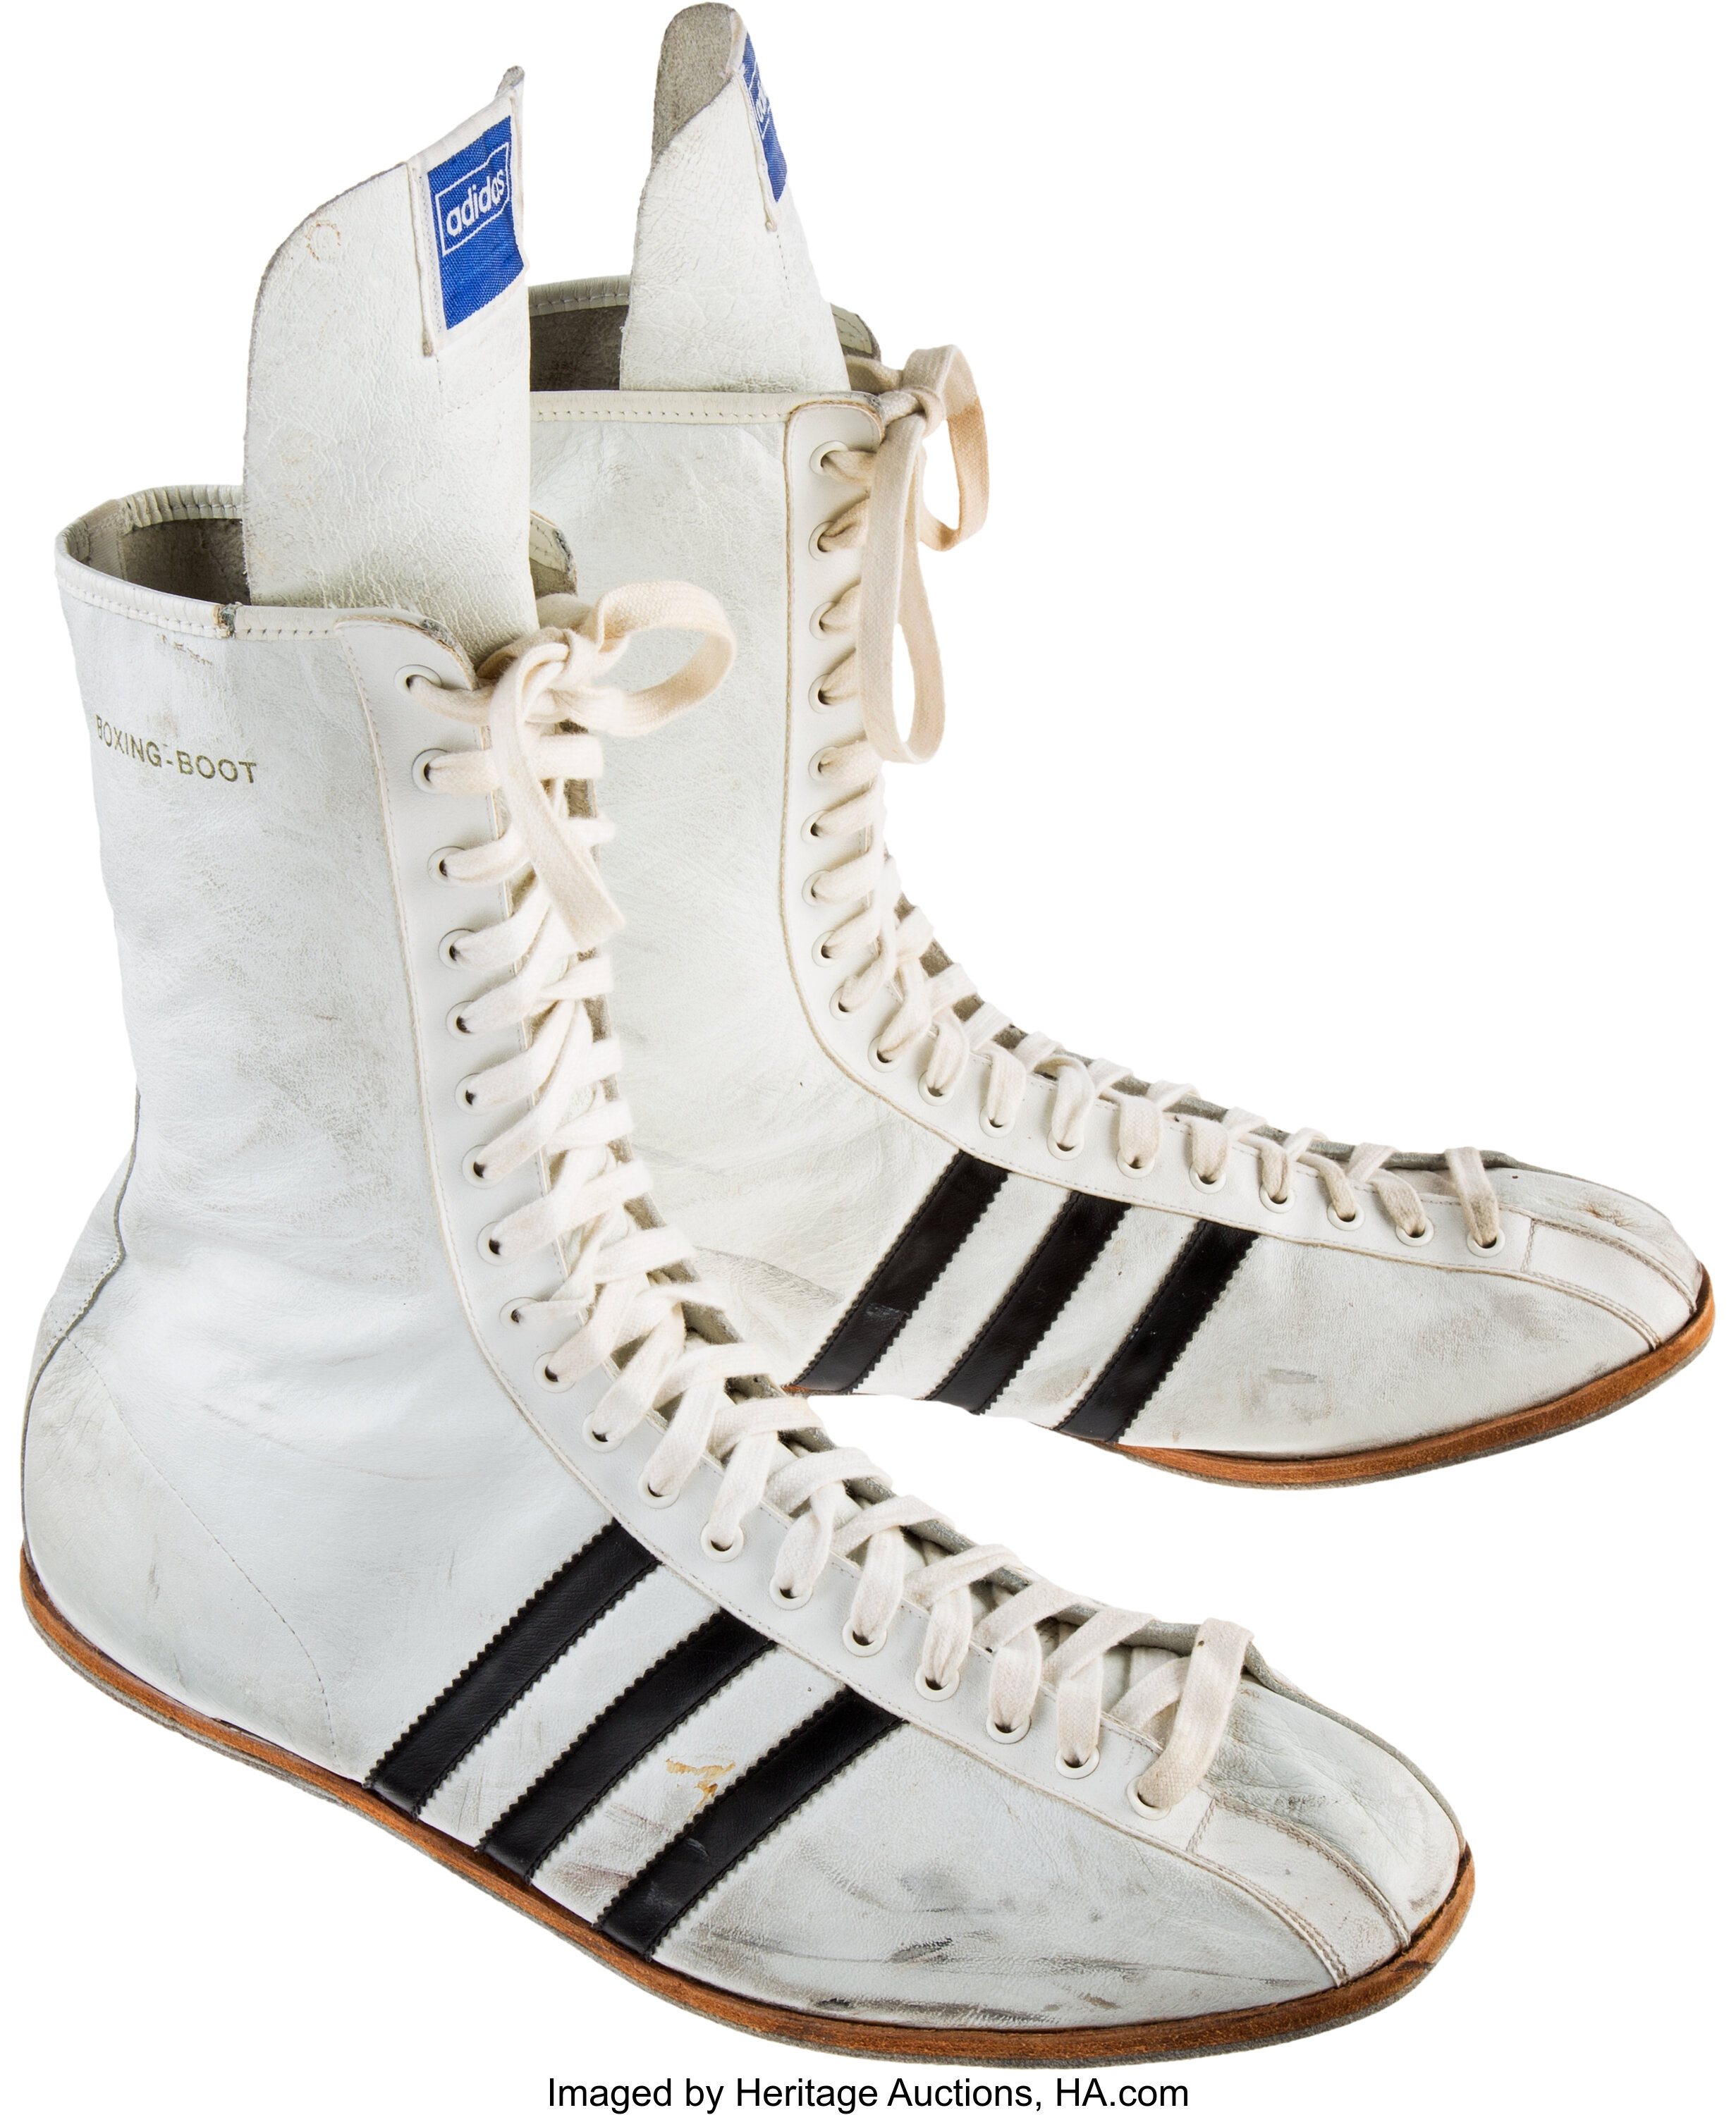 1976 Muhammad Ali Fight Worn Shoes from Ken Norton III Bout.... | Lot  #50049 | Heritage Auctions